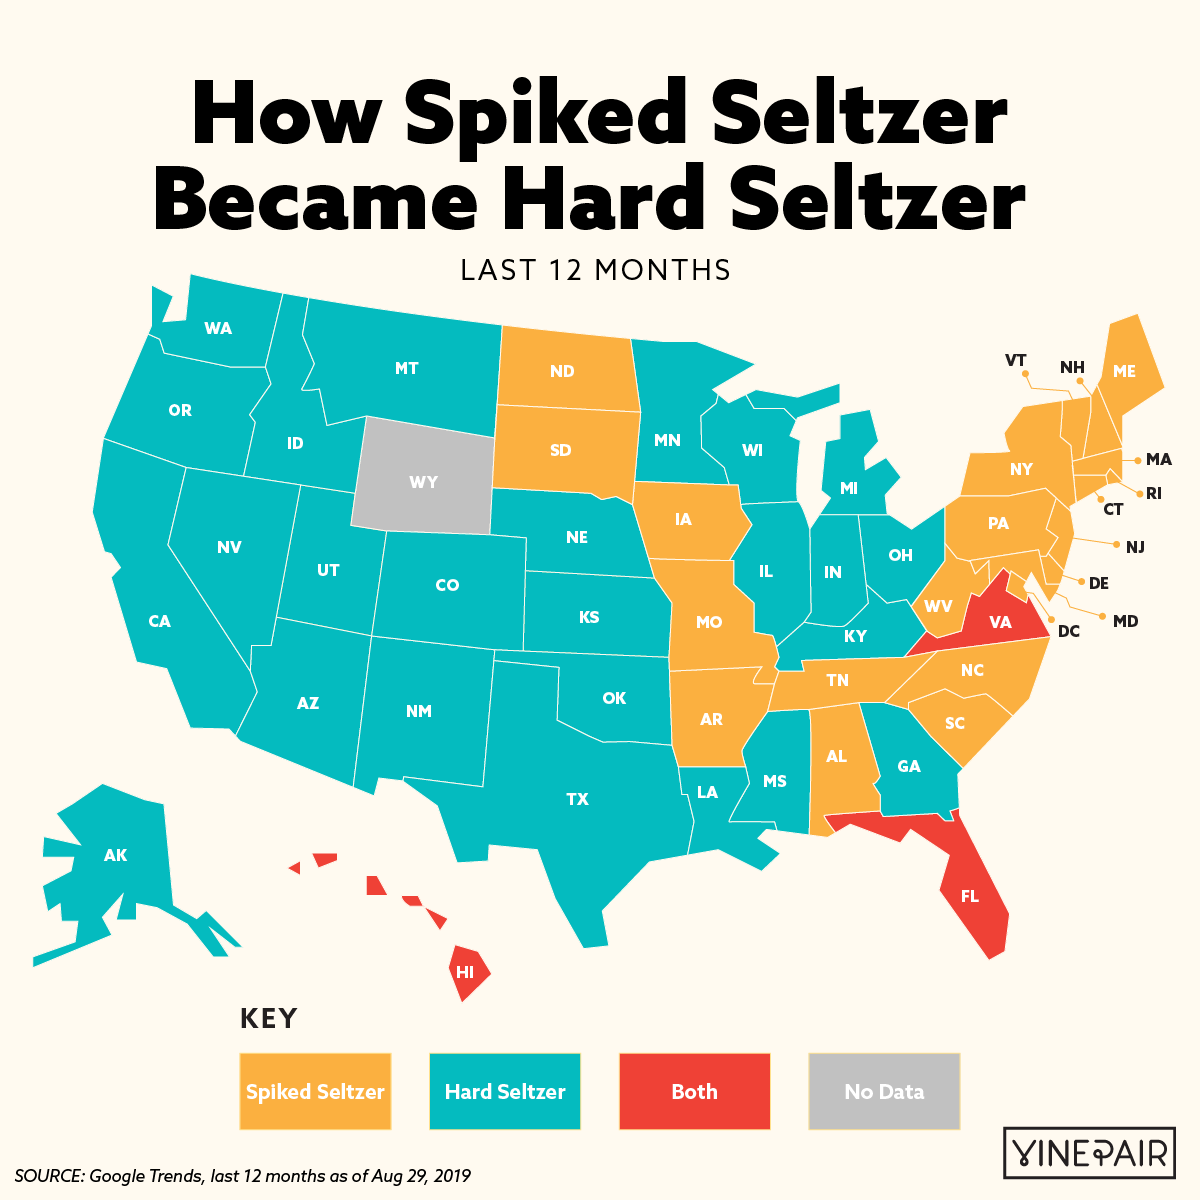 How Spiked Seltzer Became Hard Seltzer - State by State Map Last Year